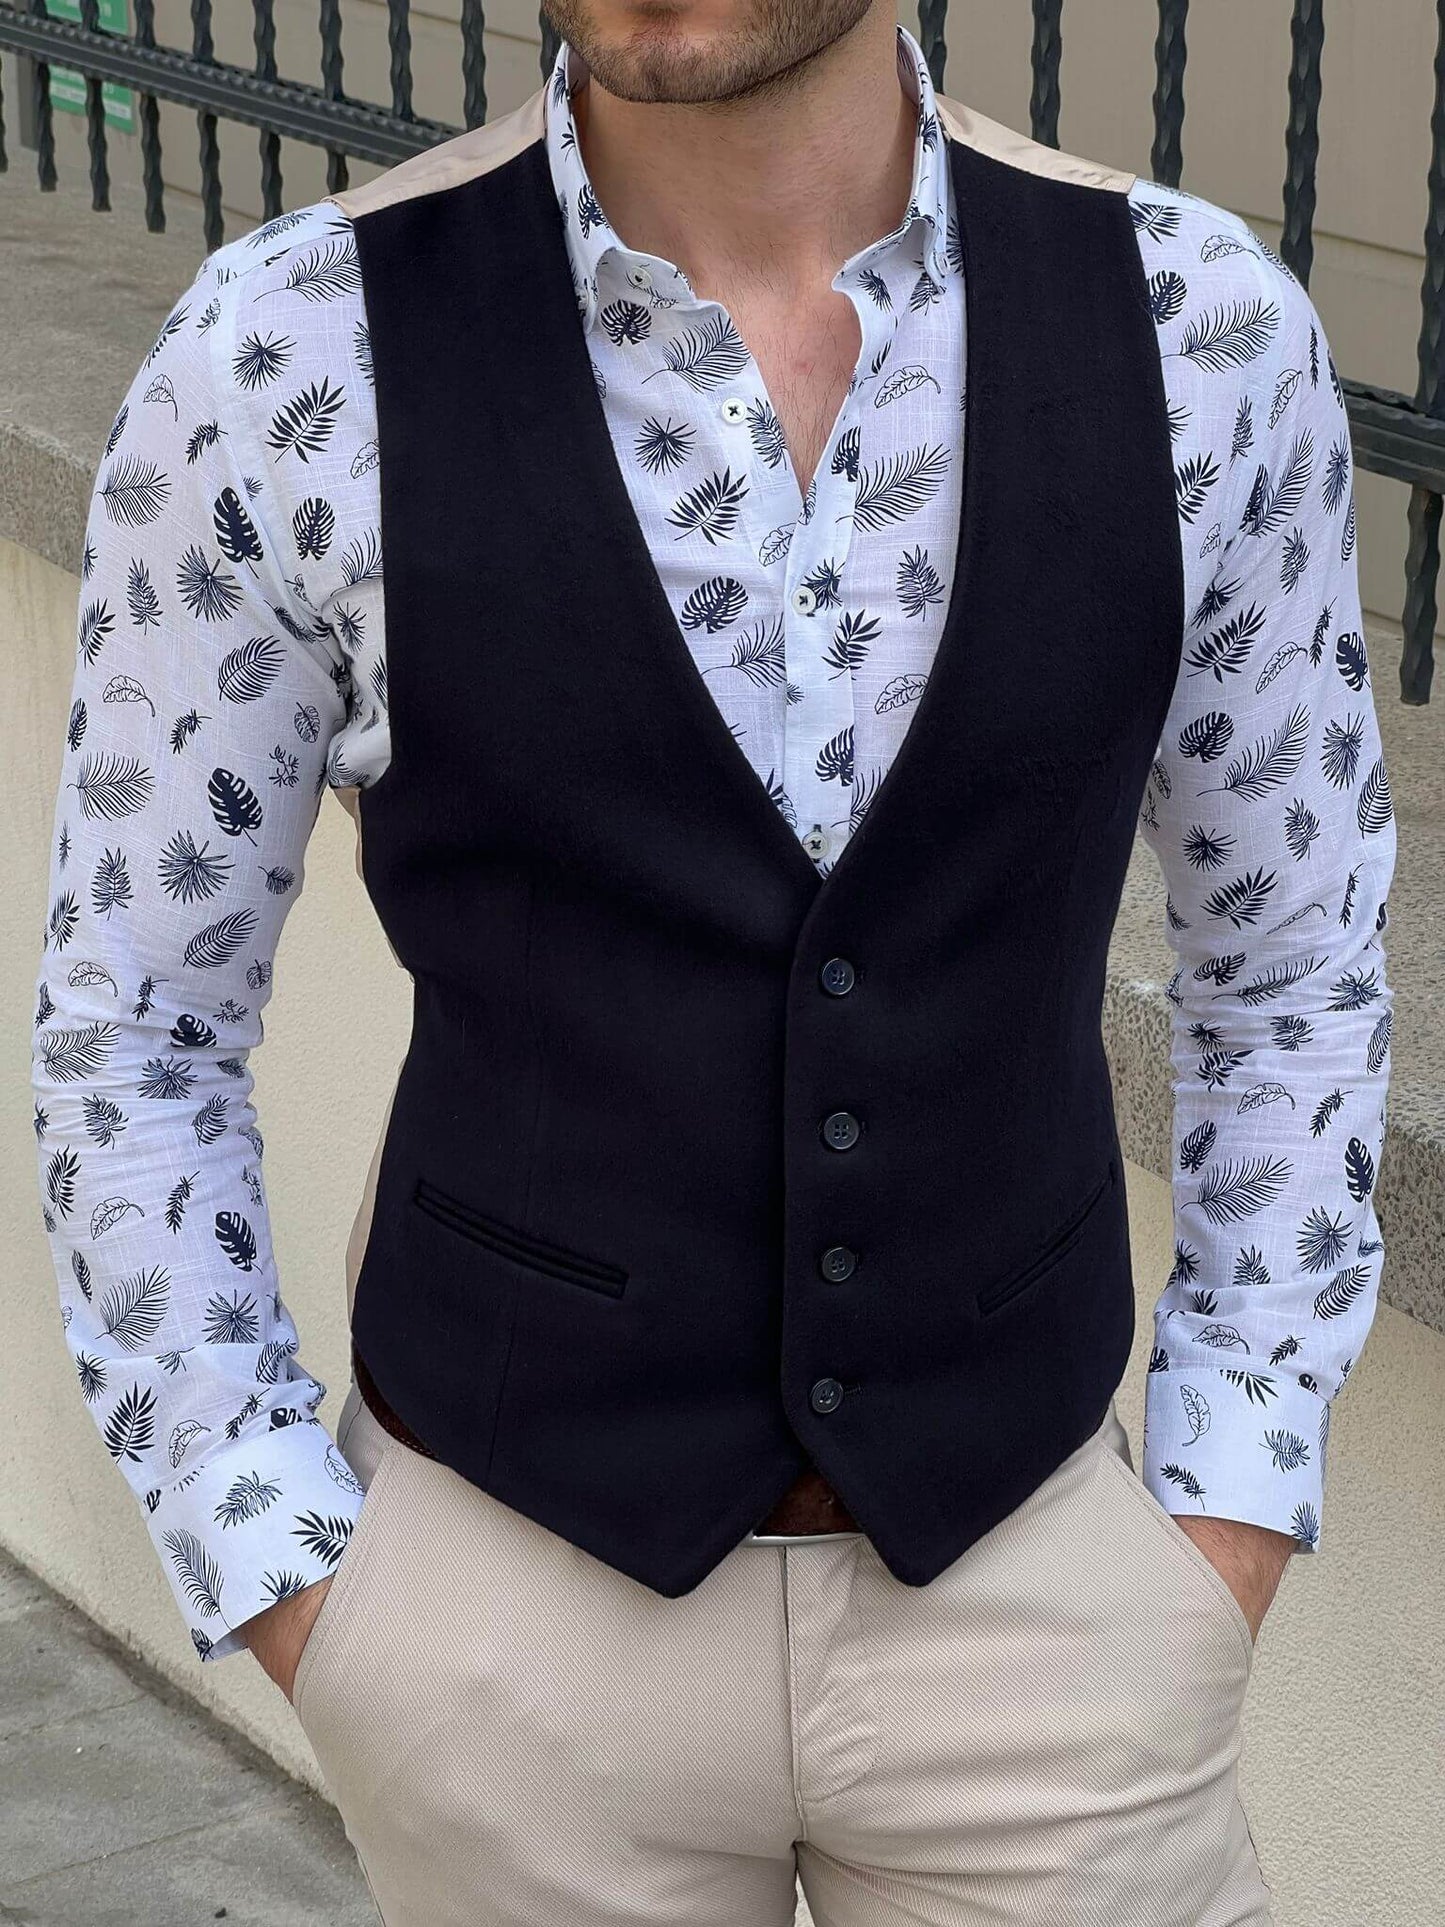 Navy blue vest featuring a slim fit for a polished look